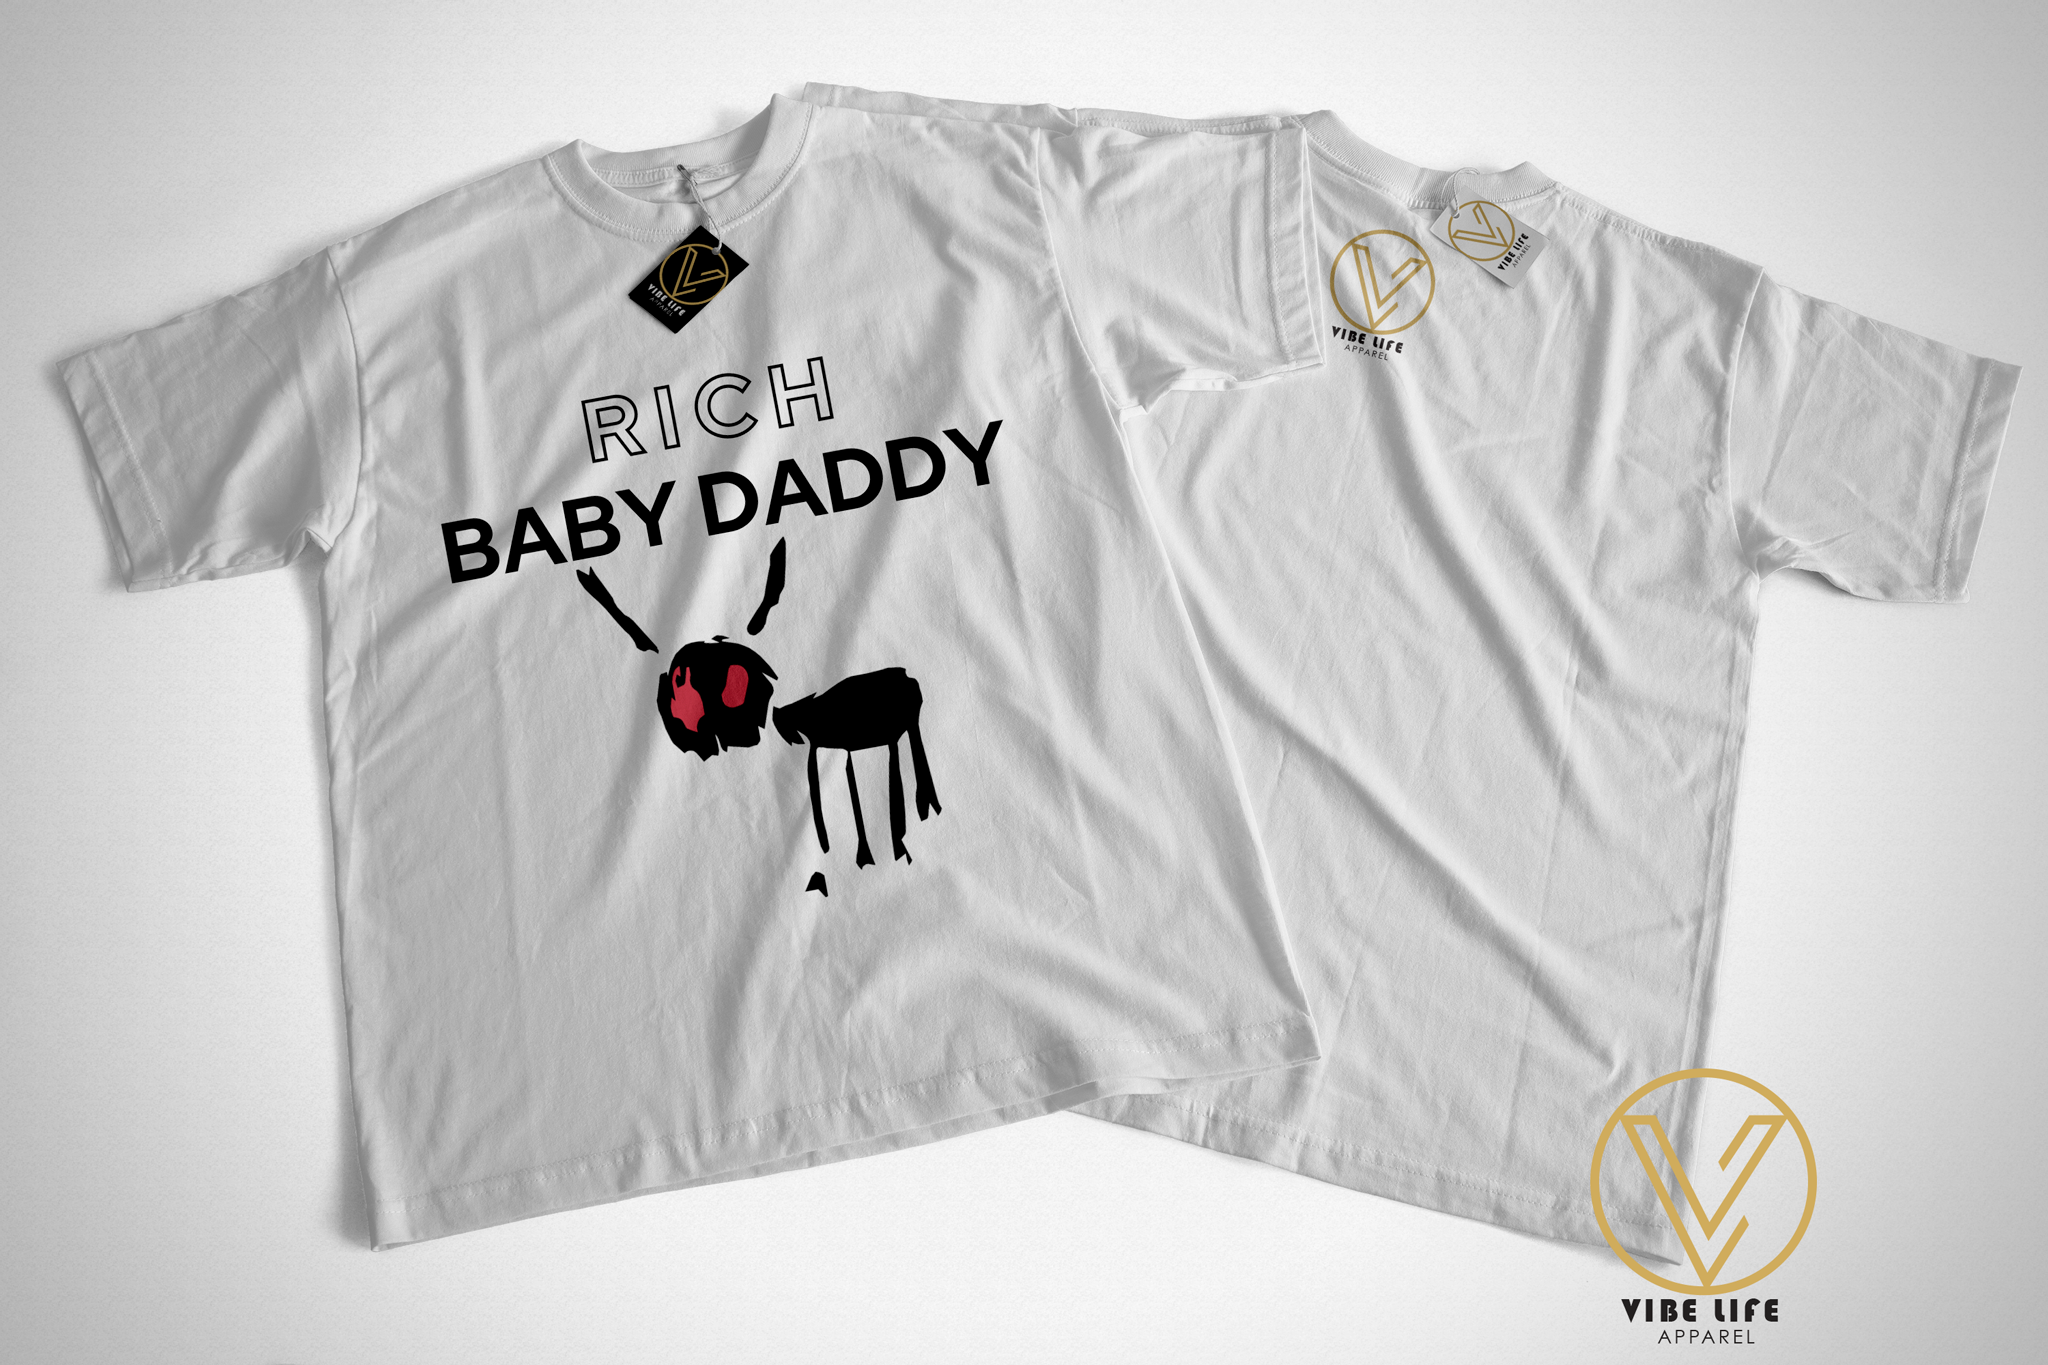 RICH - BABY DADDY Unisex Adult Tee